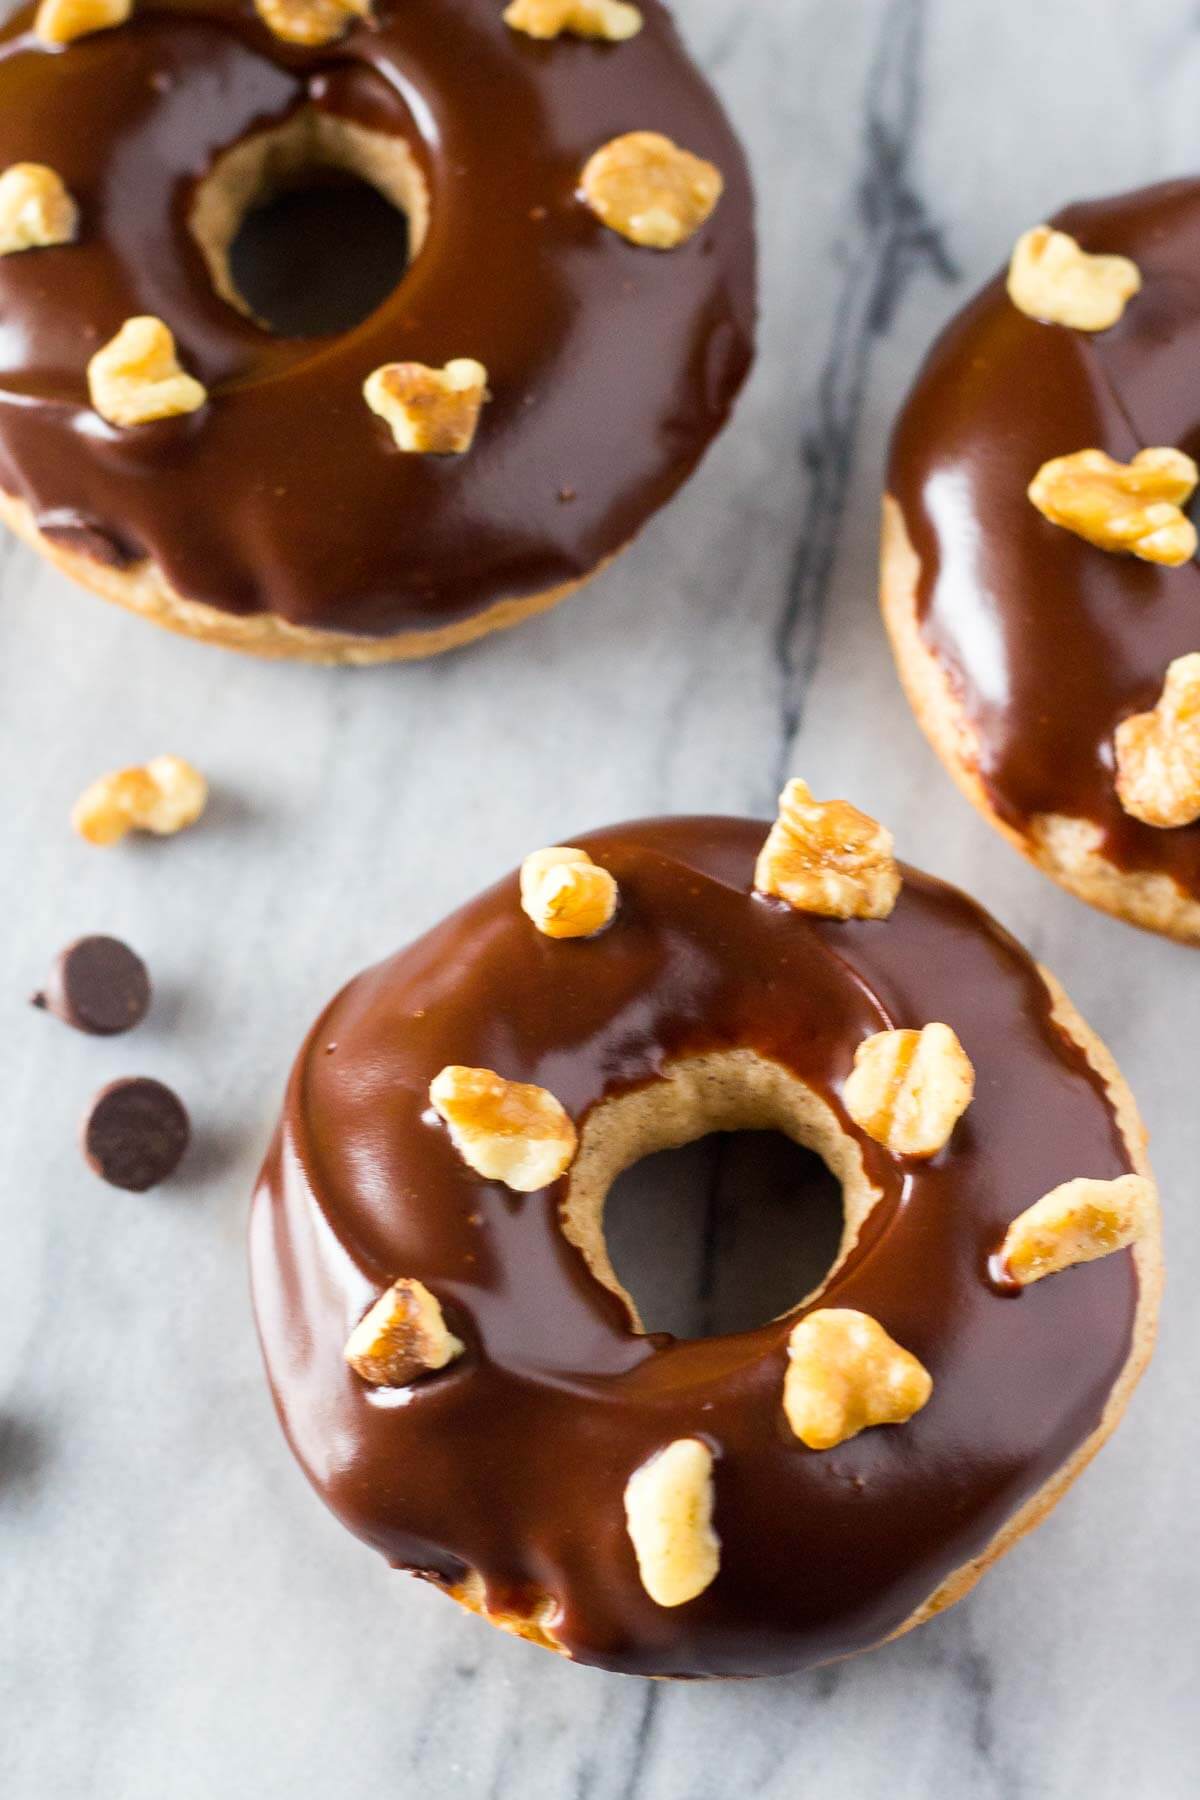 Banana Doughnuts with Chocolate Glaze - Baked not fried with big banana bread flavor & so perfect for breakfast!